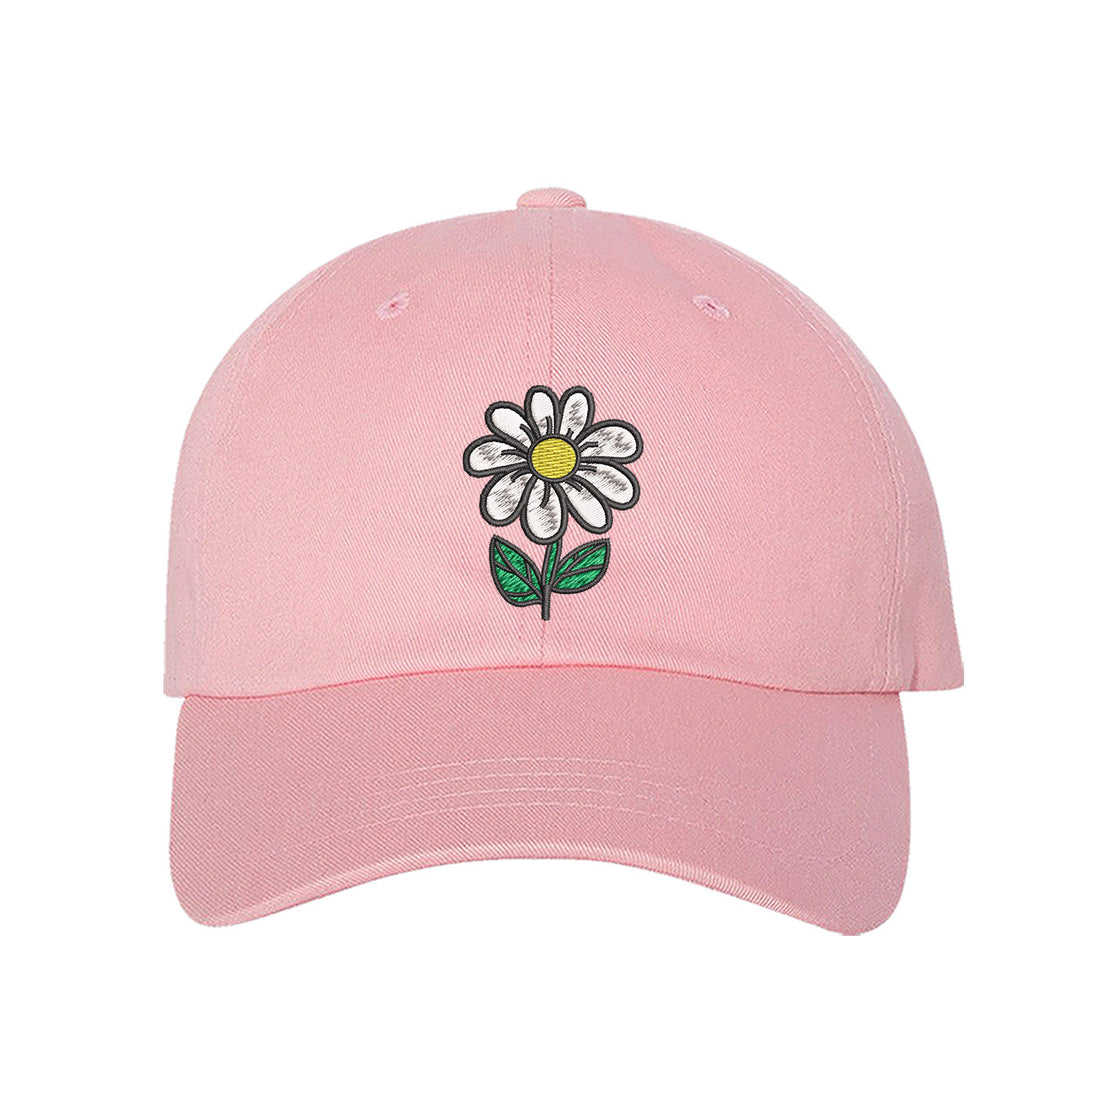 Pink Baseball Cap embroidered with a daisy flower with stem - DSY Lifestyle